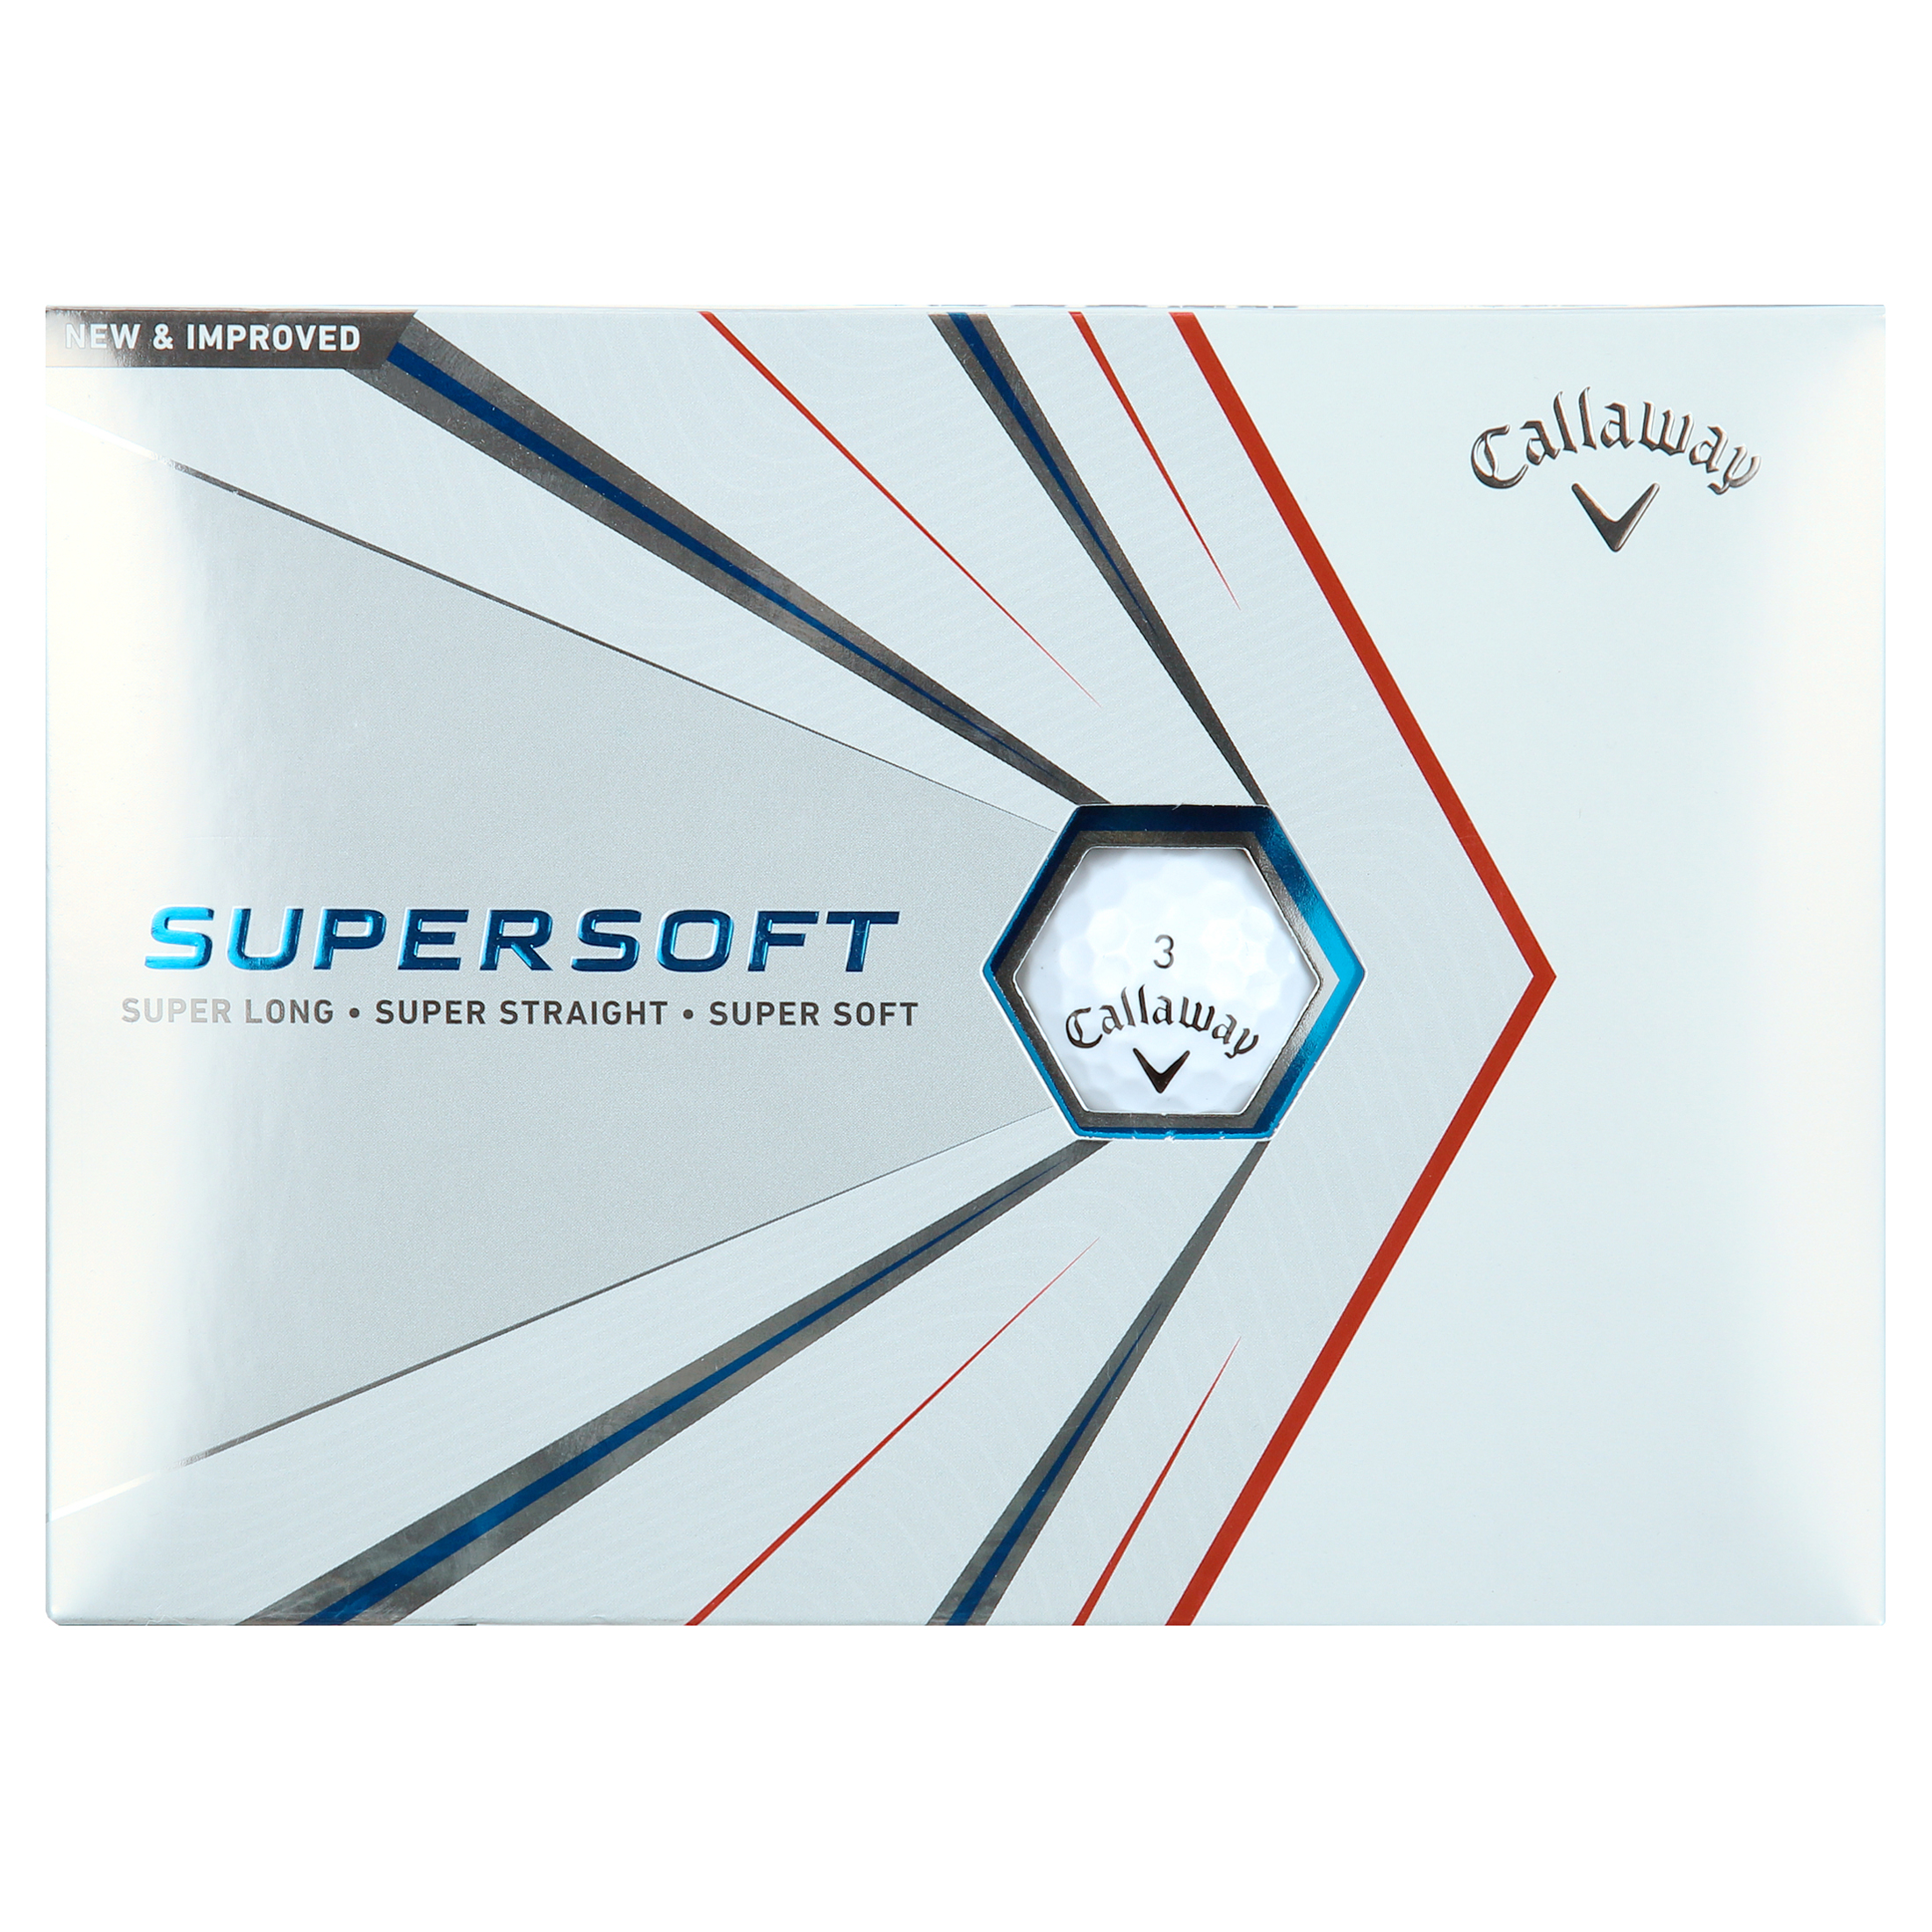 Callaway Supersoft 2021 Golf Balls, White, 12 Pack - image 4 of 6